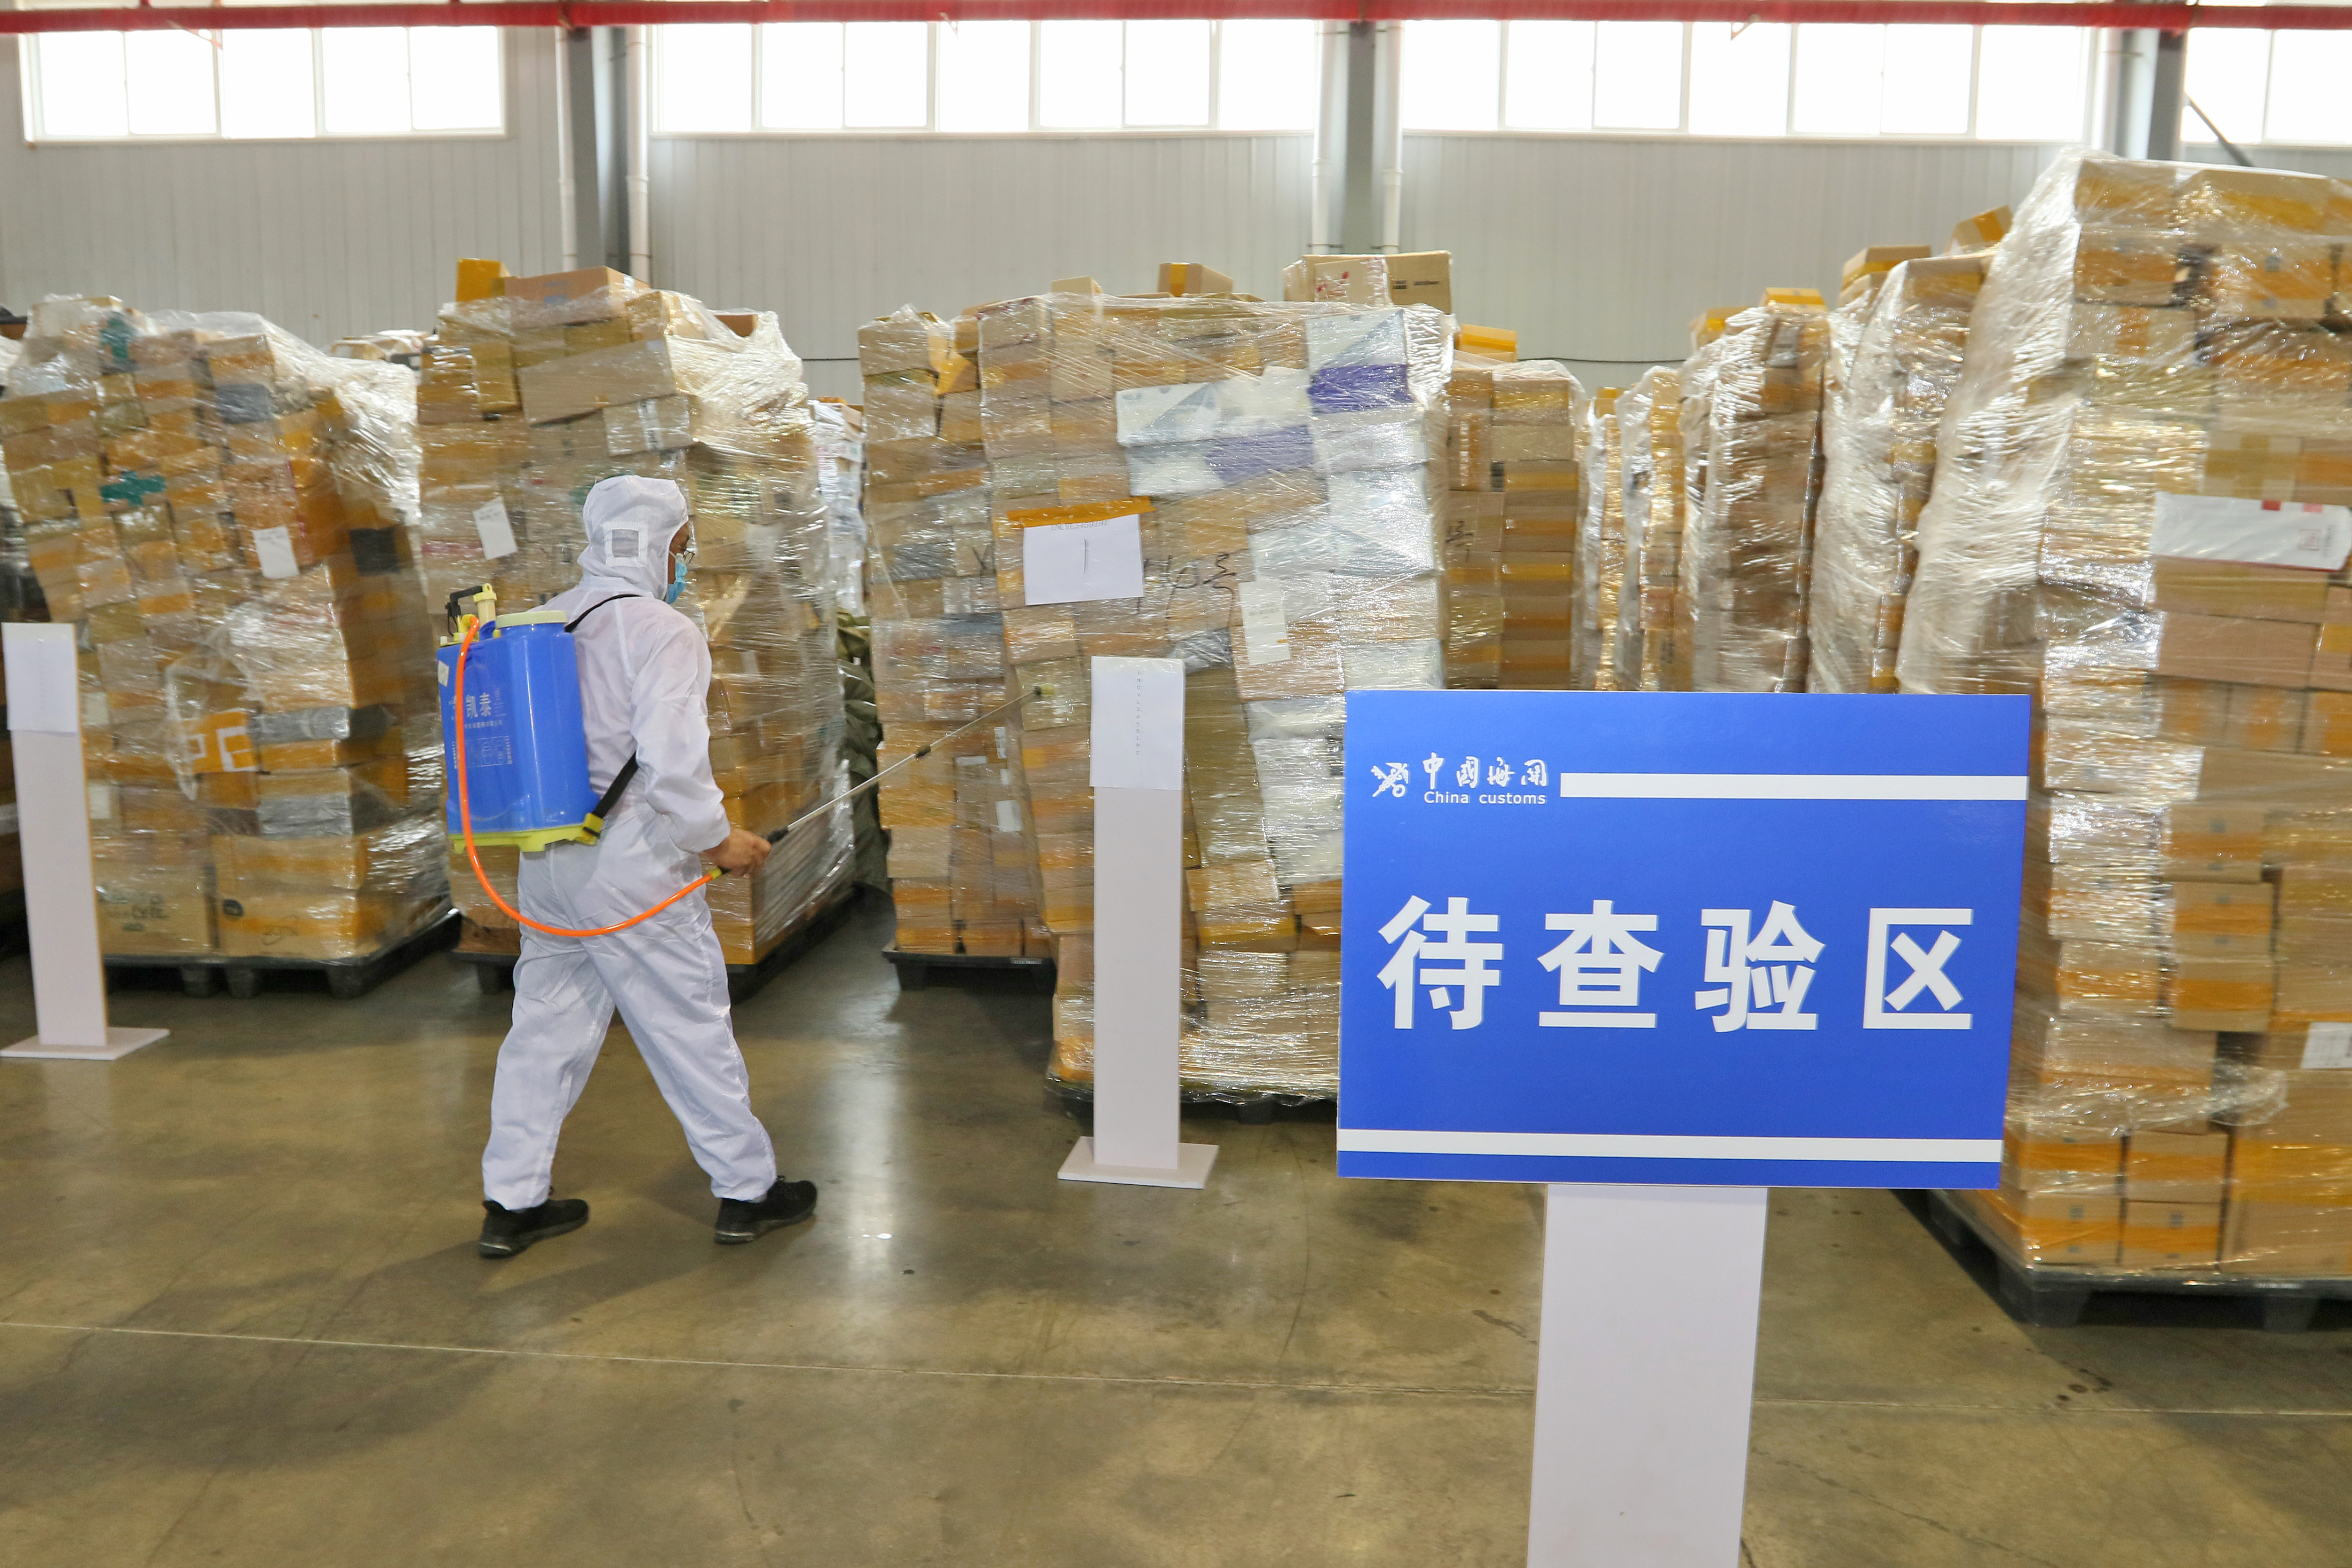 A worker disinfects cross-border express packages in Yantai, East China’s Shandong province, in August 2020. Photo: VCG